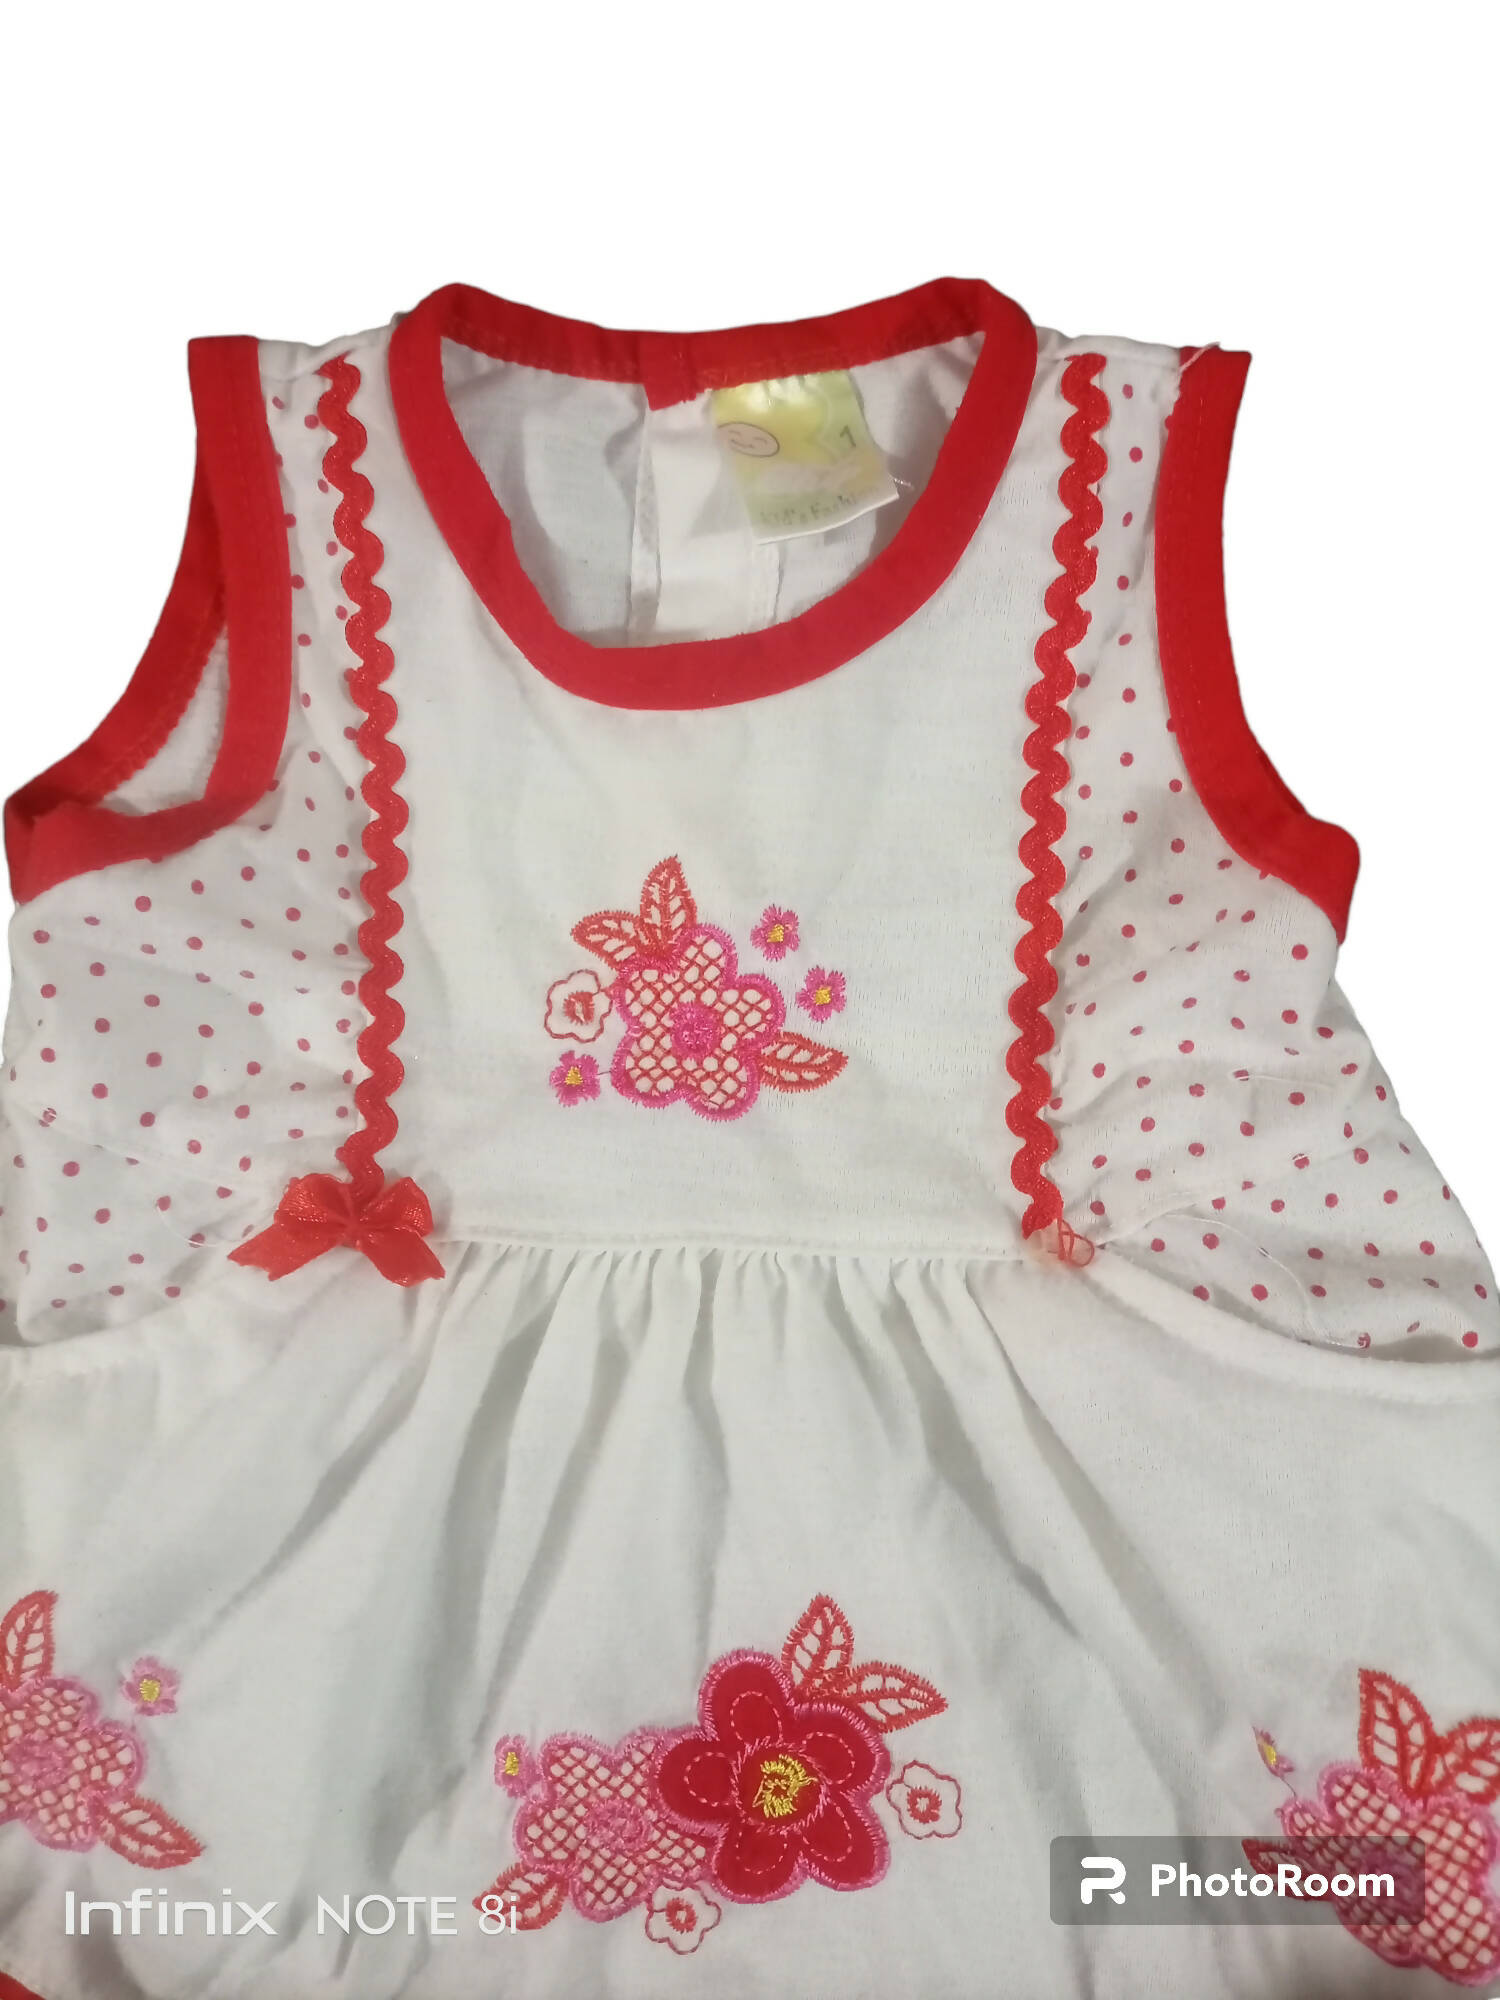 Red & White Baby Frock (Size: XS) | Girls Tops & Shirts | Preloved